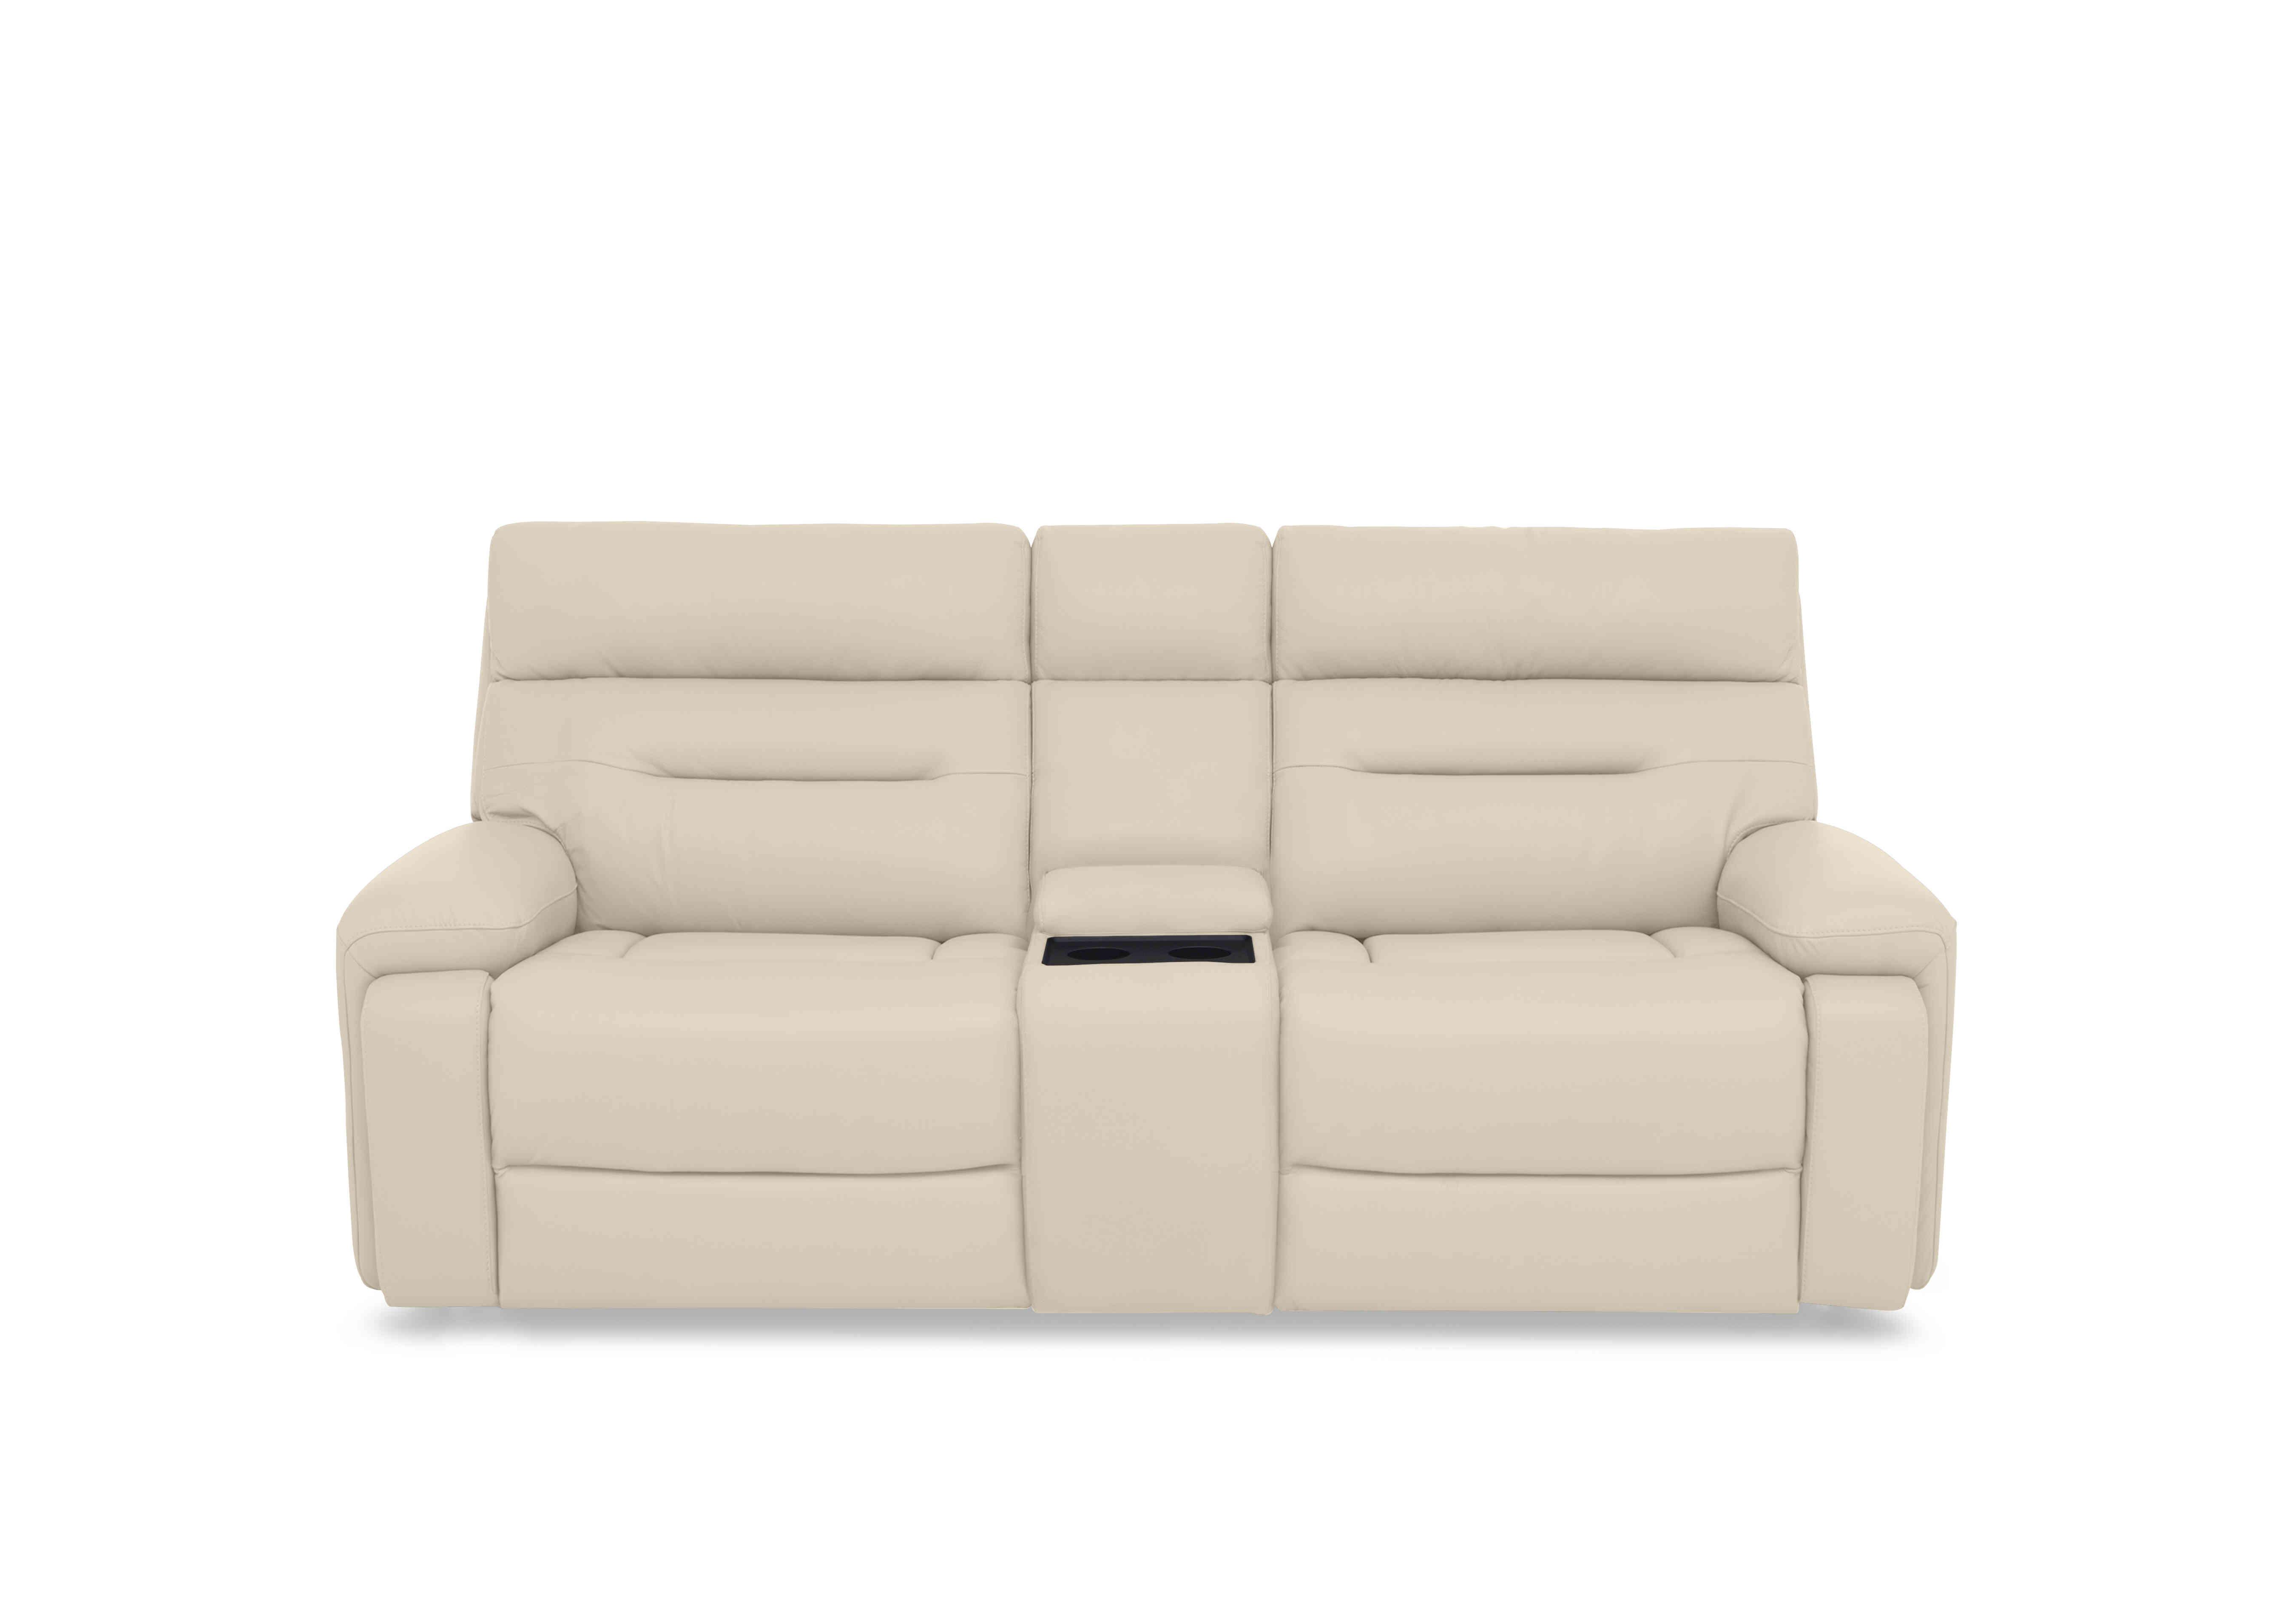 Cinemax Media 3 Seater Leather Power Recliner Sofa with Power Headrests in Lx-6407 Stone on Furniture Village